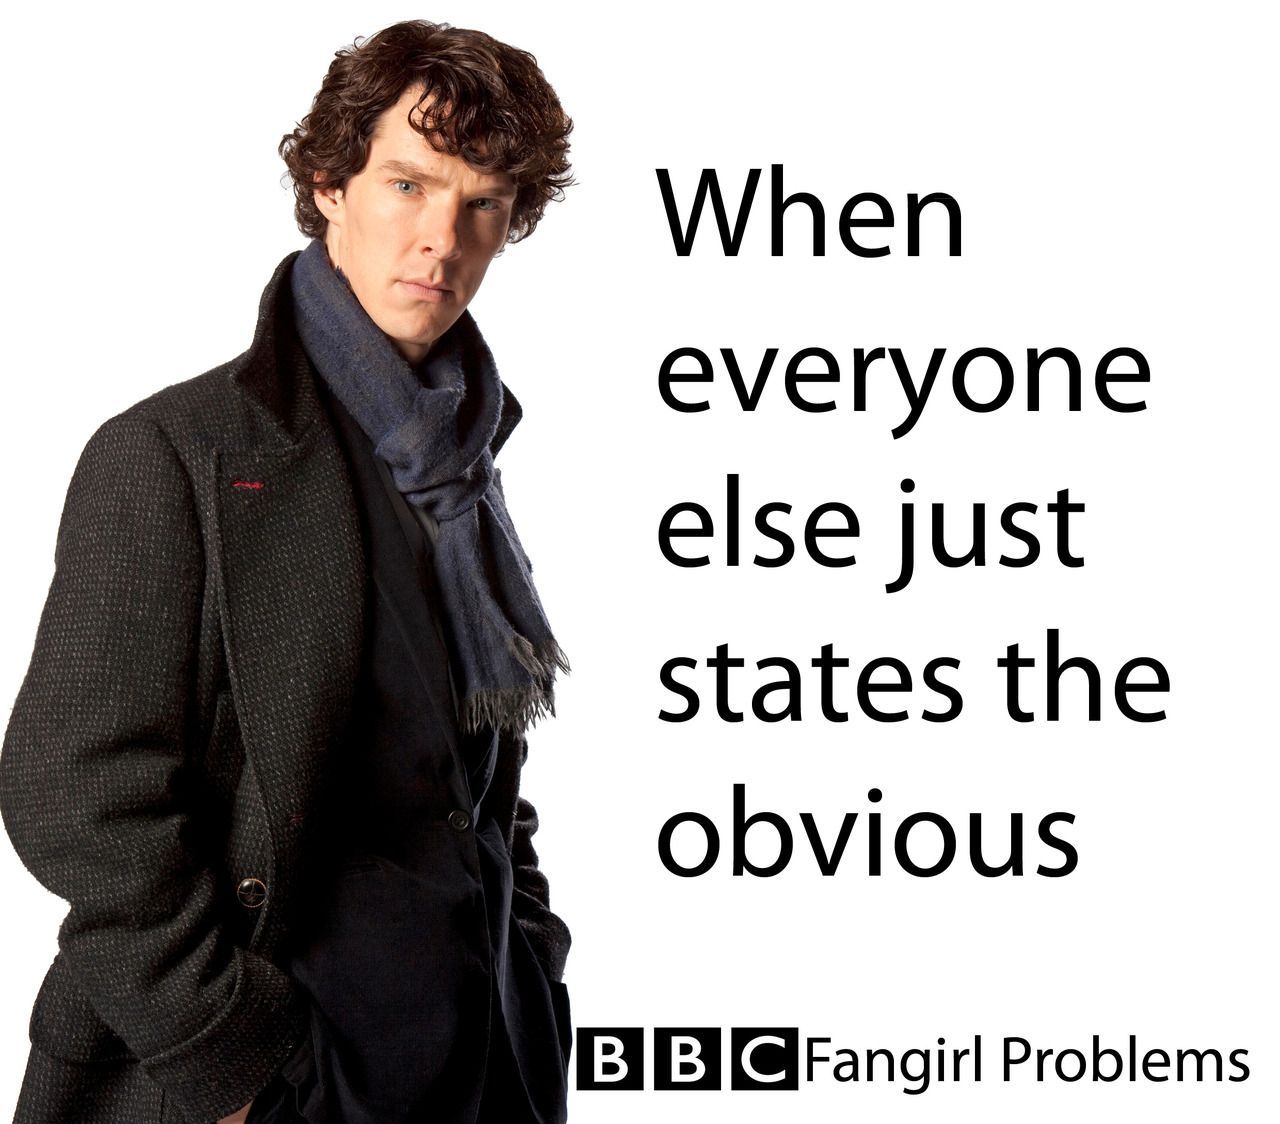 BBC Fangirl Problems. This is actually becoming a problem.